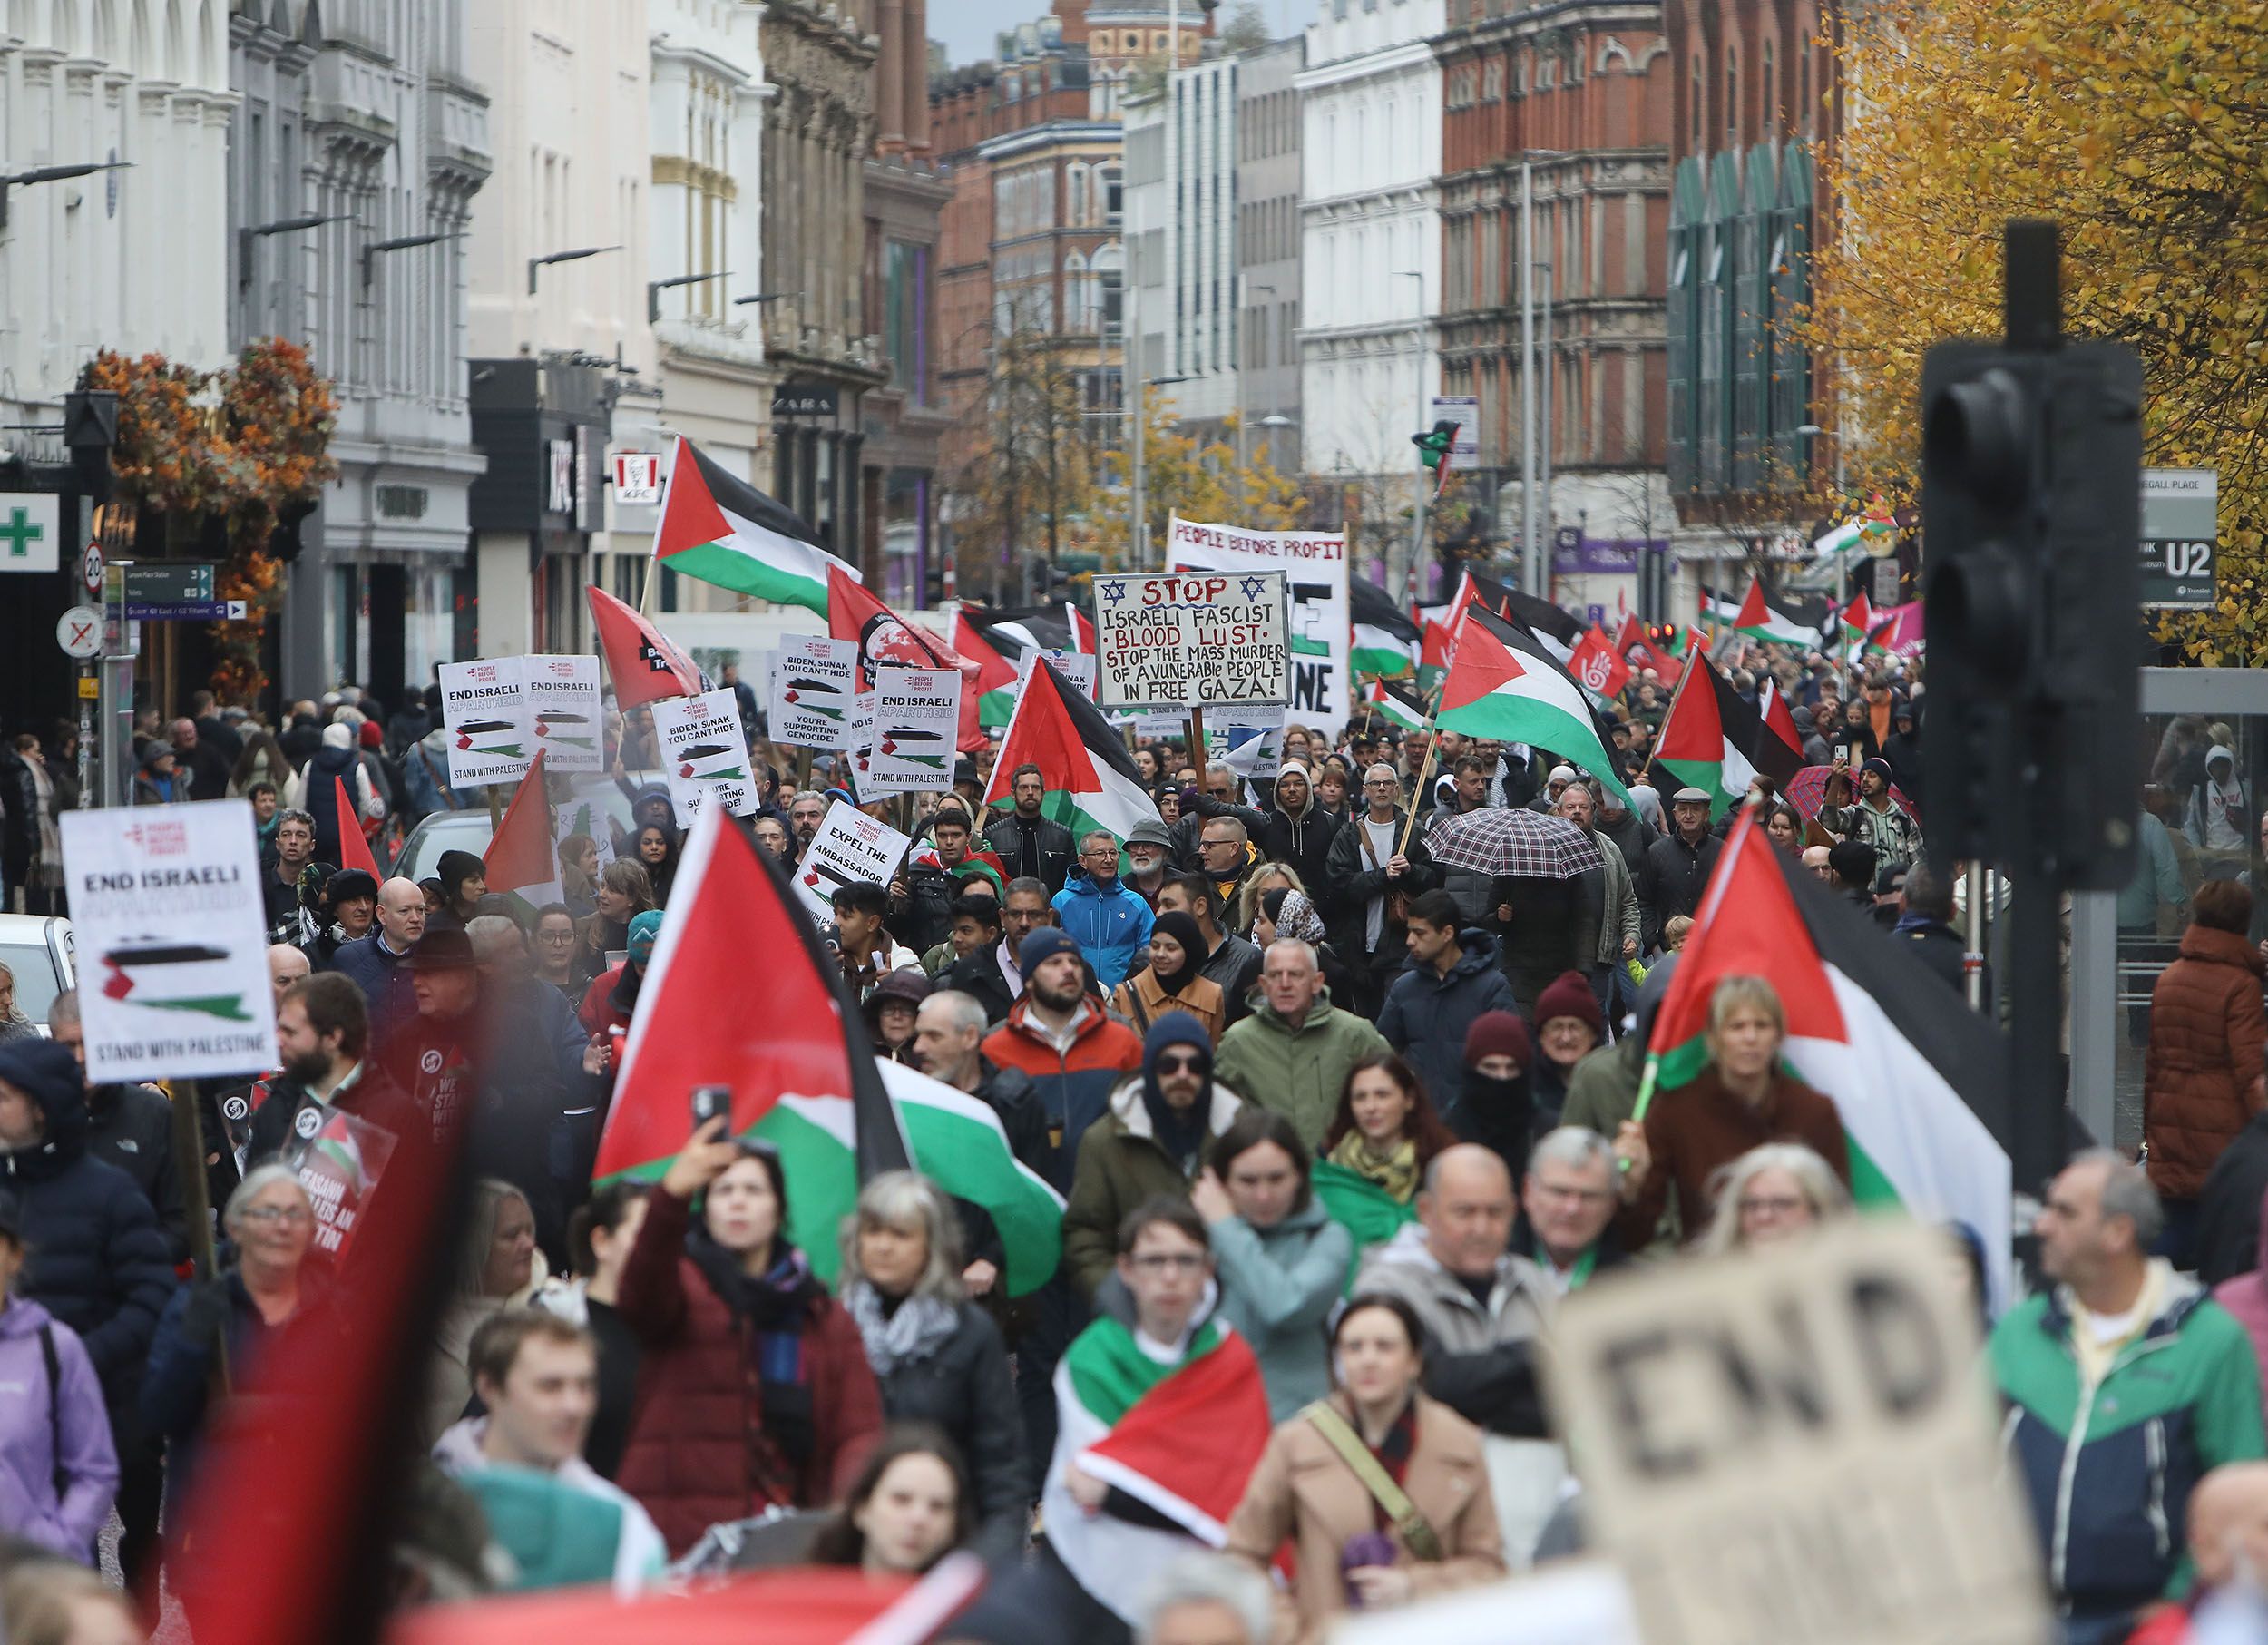 SUPPORT: Thousands of pro-Palestinian supporters have come onto the streets of Belfast in recent weeks